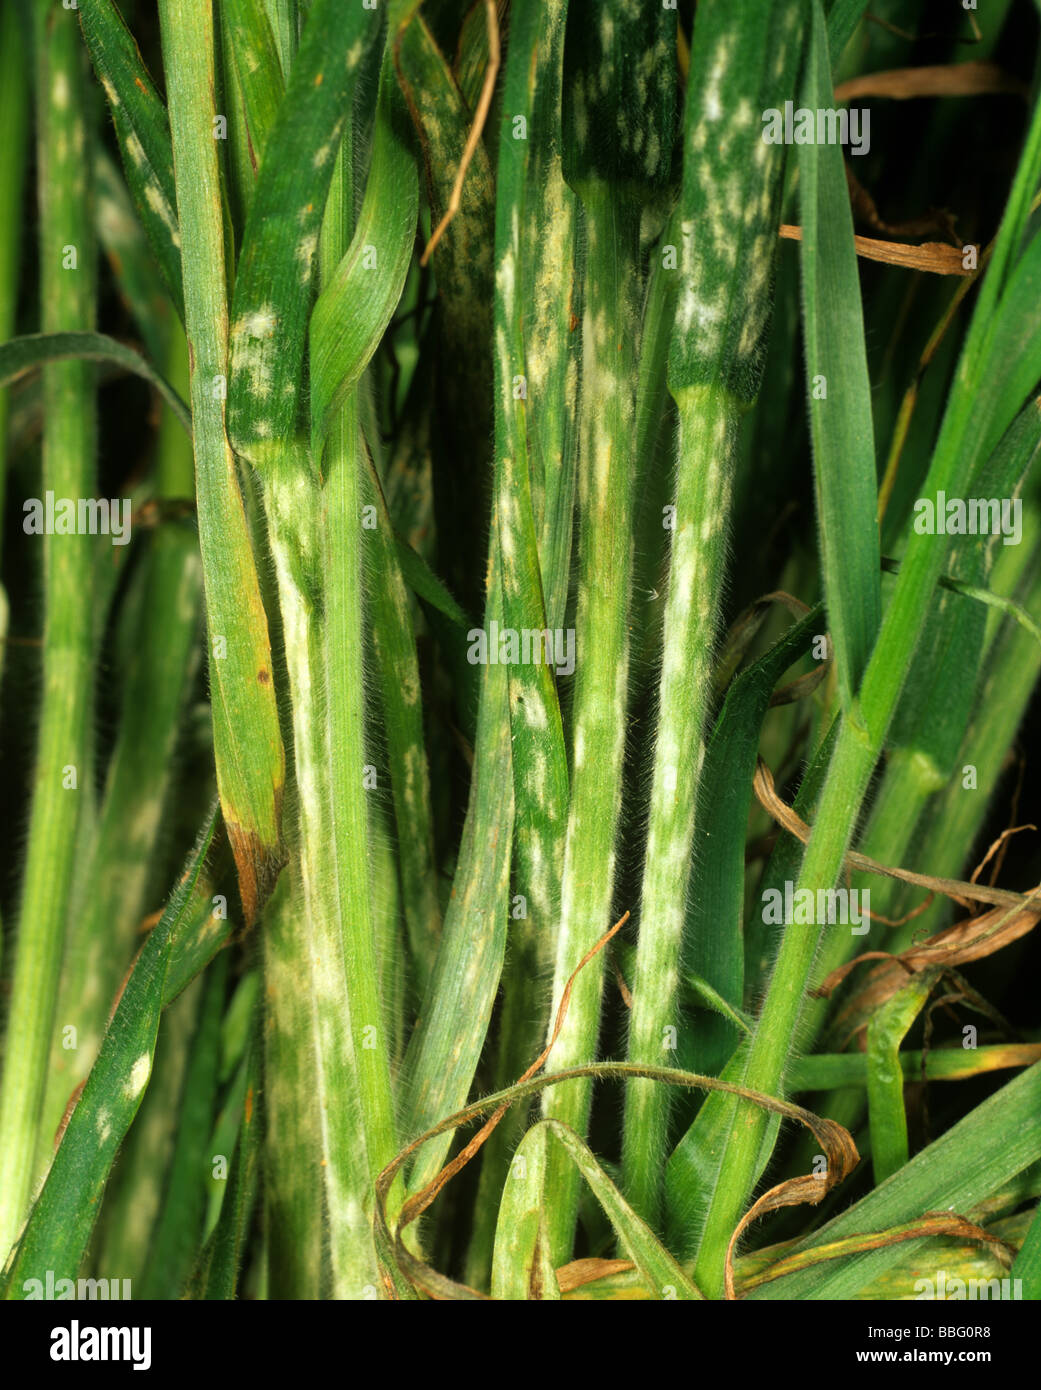 Powdery mildew Erysiphe graminis on soft brome Bromus hordeaceus stems and leaves Stock Photo